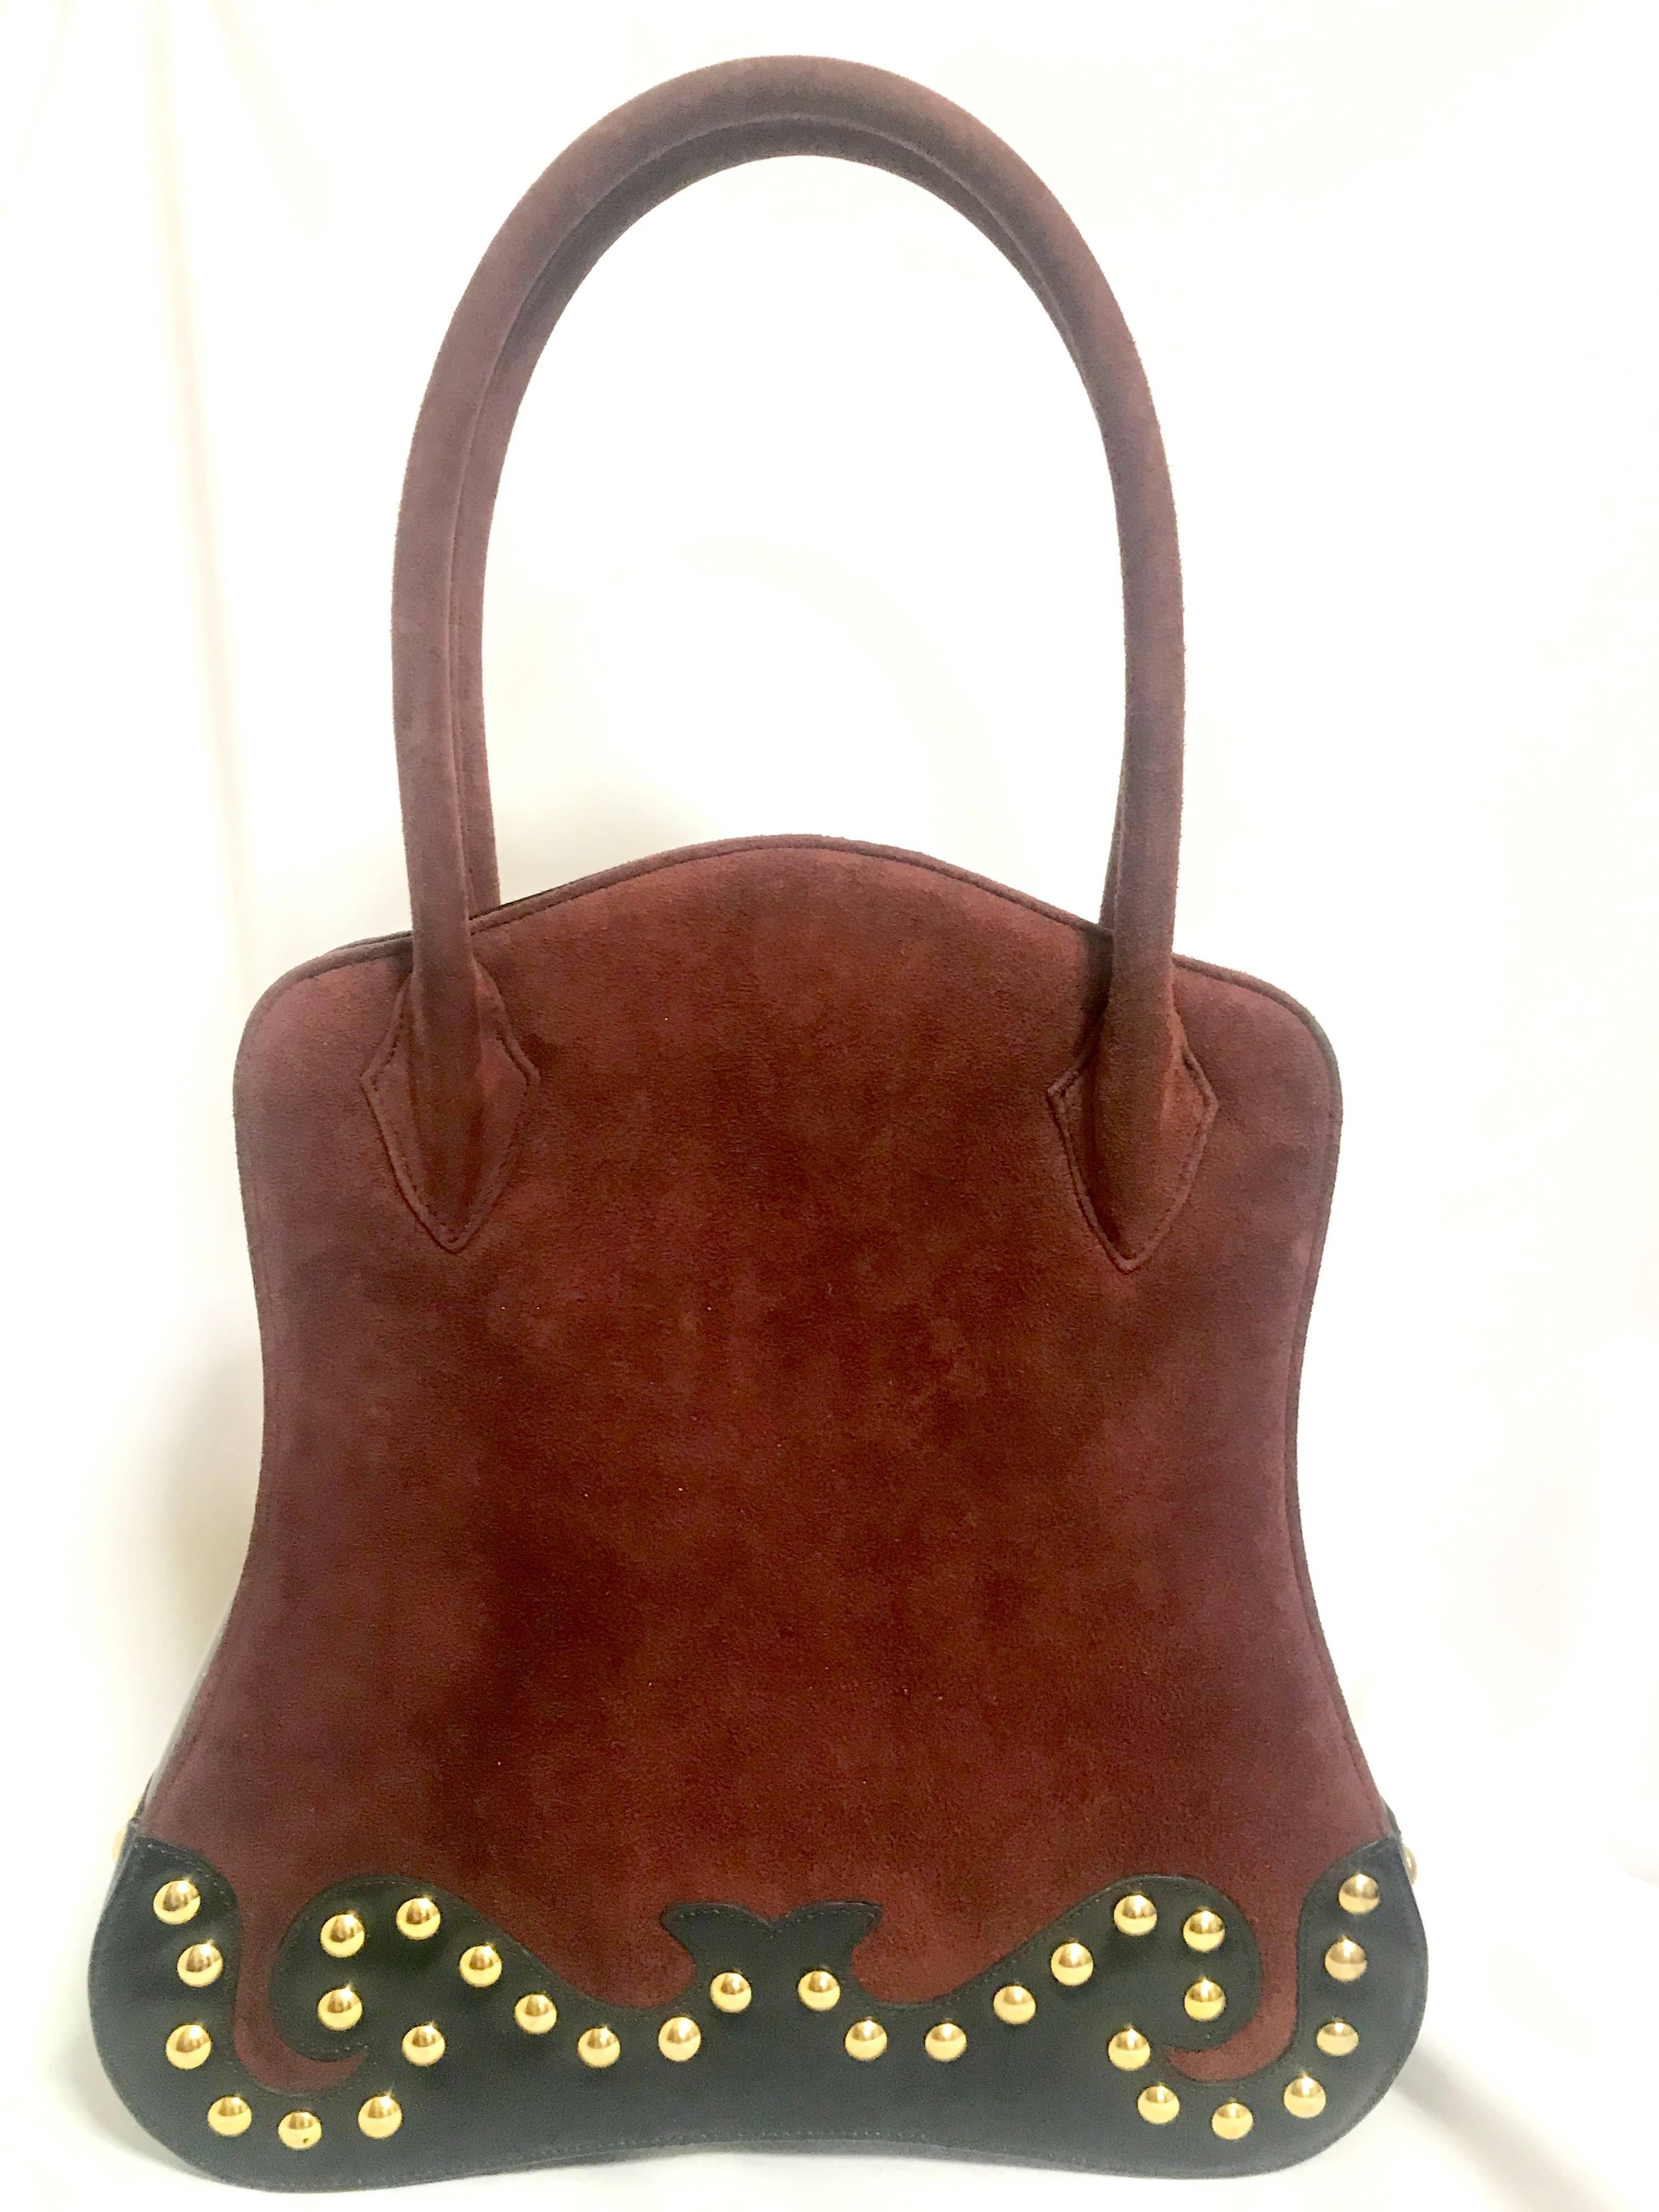 1990s. Vintage Christian Lacroix genuine wine brown suede and black leather sexy feminine shape bag with golden logo motif and studs.  Hot purse.

Here is another beautiful and rare piece from Christian Lacroix back in the 90's. 
Genuine wine brown